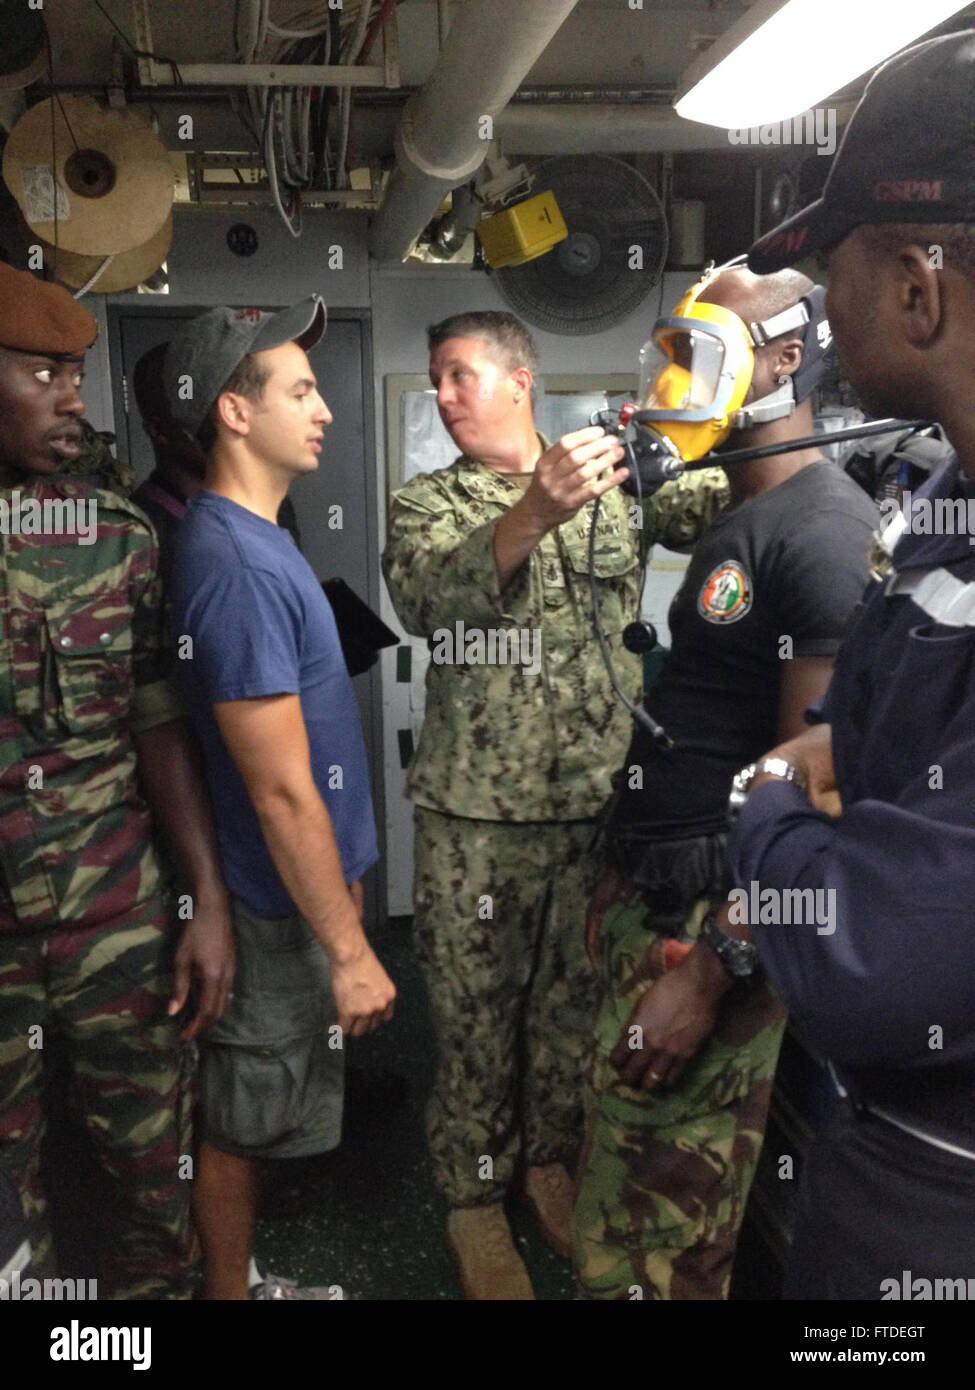 150704-N-ZZ999-016 ABIDJAN, Cote d’ Ivoire (July 4, 2015) Senior Chief Navy Diver Donald Schappert and Navy Diver 2nd Class Octavio Alvarez, Sailors assigned to Mobile Diving and Salvage Unit (MDSU) 2-4, demonstrate the use of a full face mask for SCUBA aboard the Military Sealift Command rescue and salvage ship USNS GRASP (T-ARS 51) during a diving exercise in support of theater security cooperation in Abidjan, Cote d’Ivoire, July 4, 2015. U.S. 6th Fleet, headquartered in Naples, Italy, conducts the full spectrum of joint and naval operations, often in concert with allied, joint, and interage Stock Photo